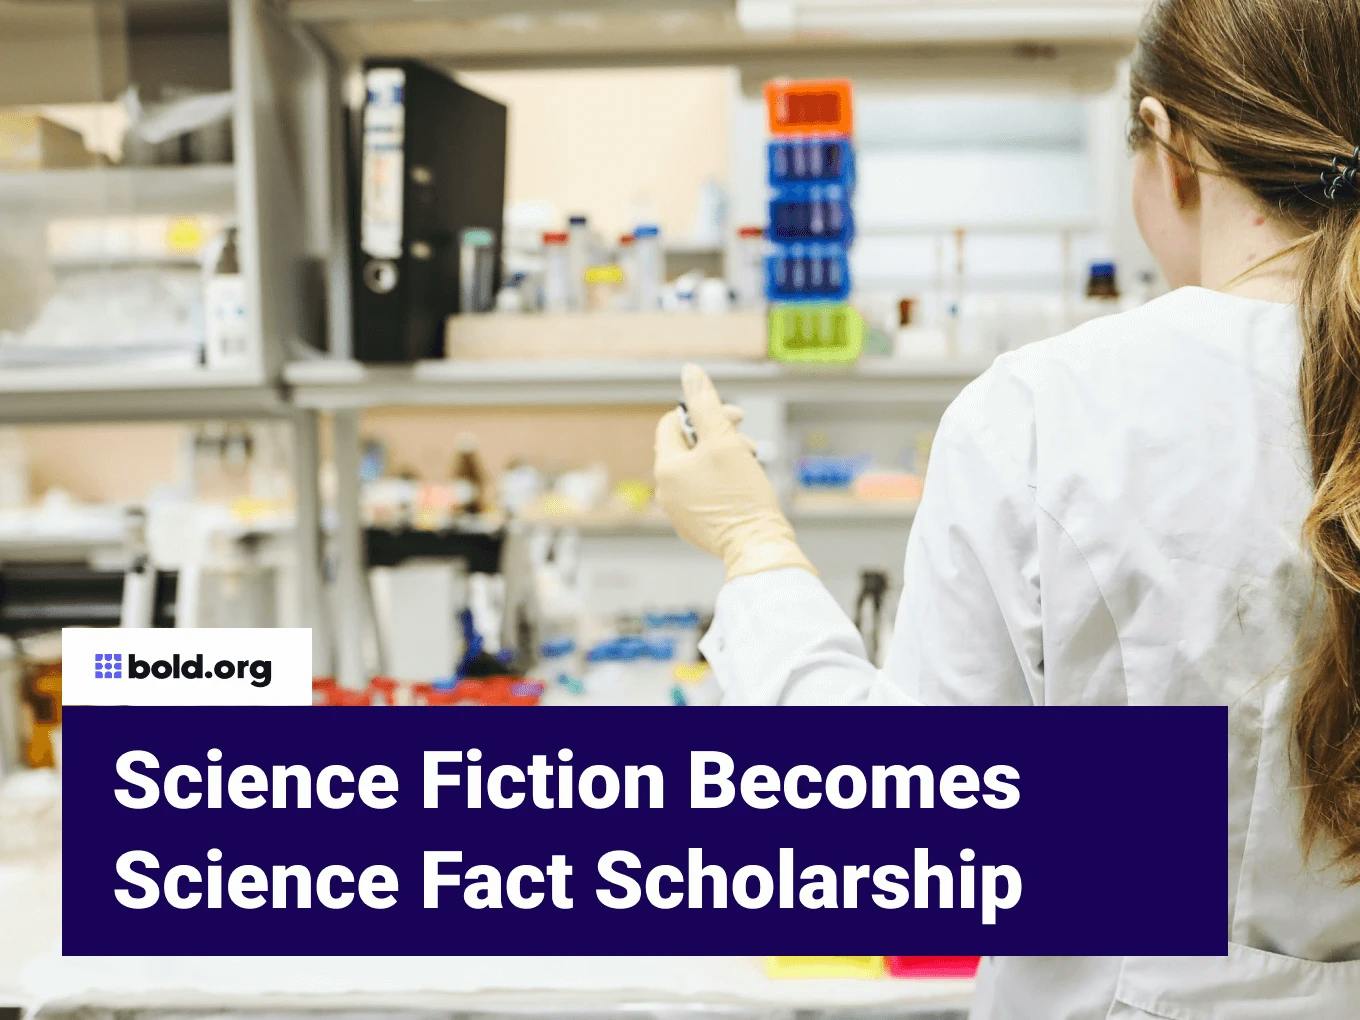 Science Fiction Becomes Science Fact Scholarship